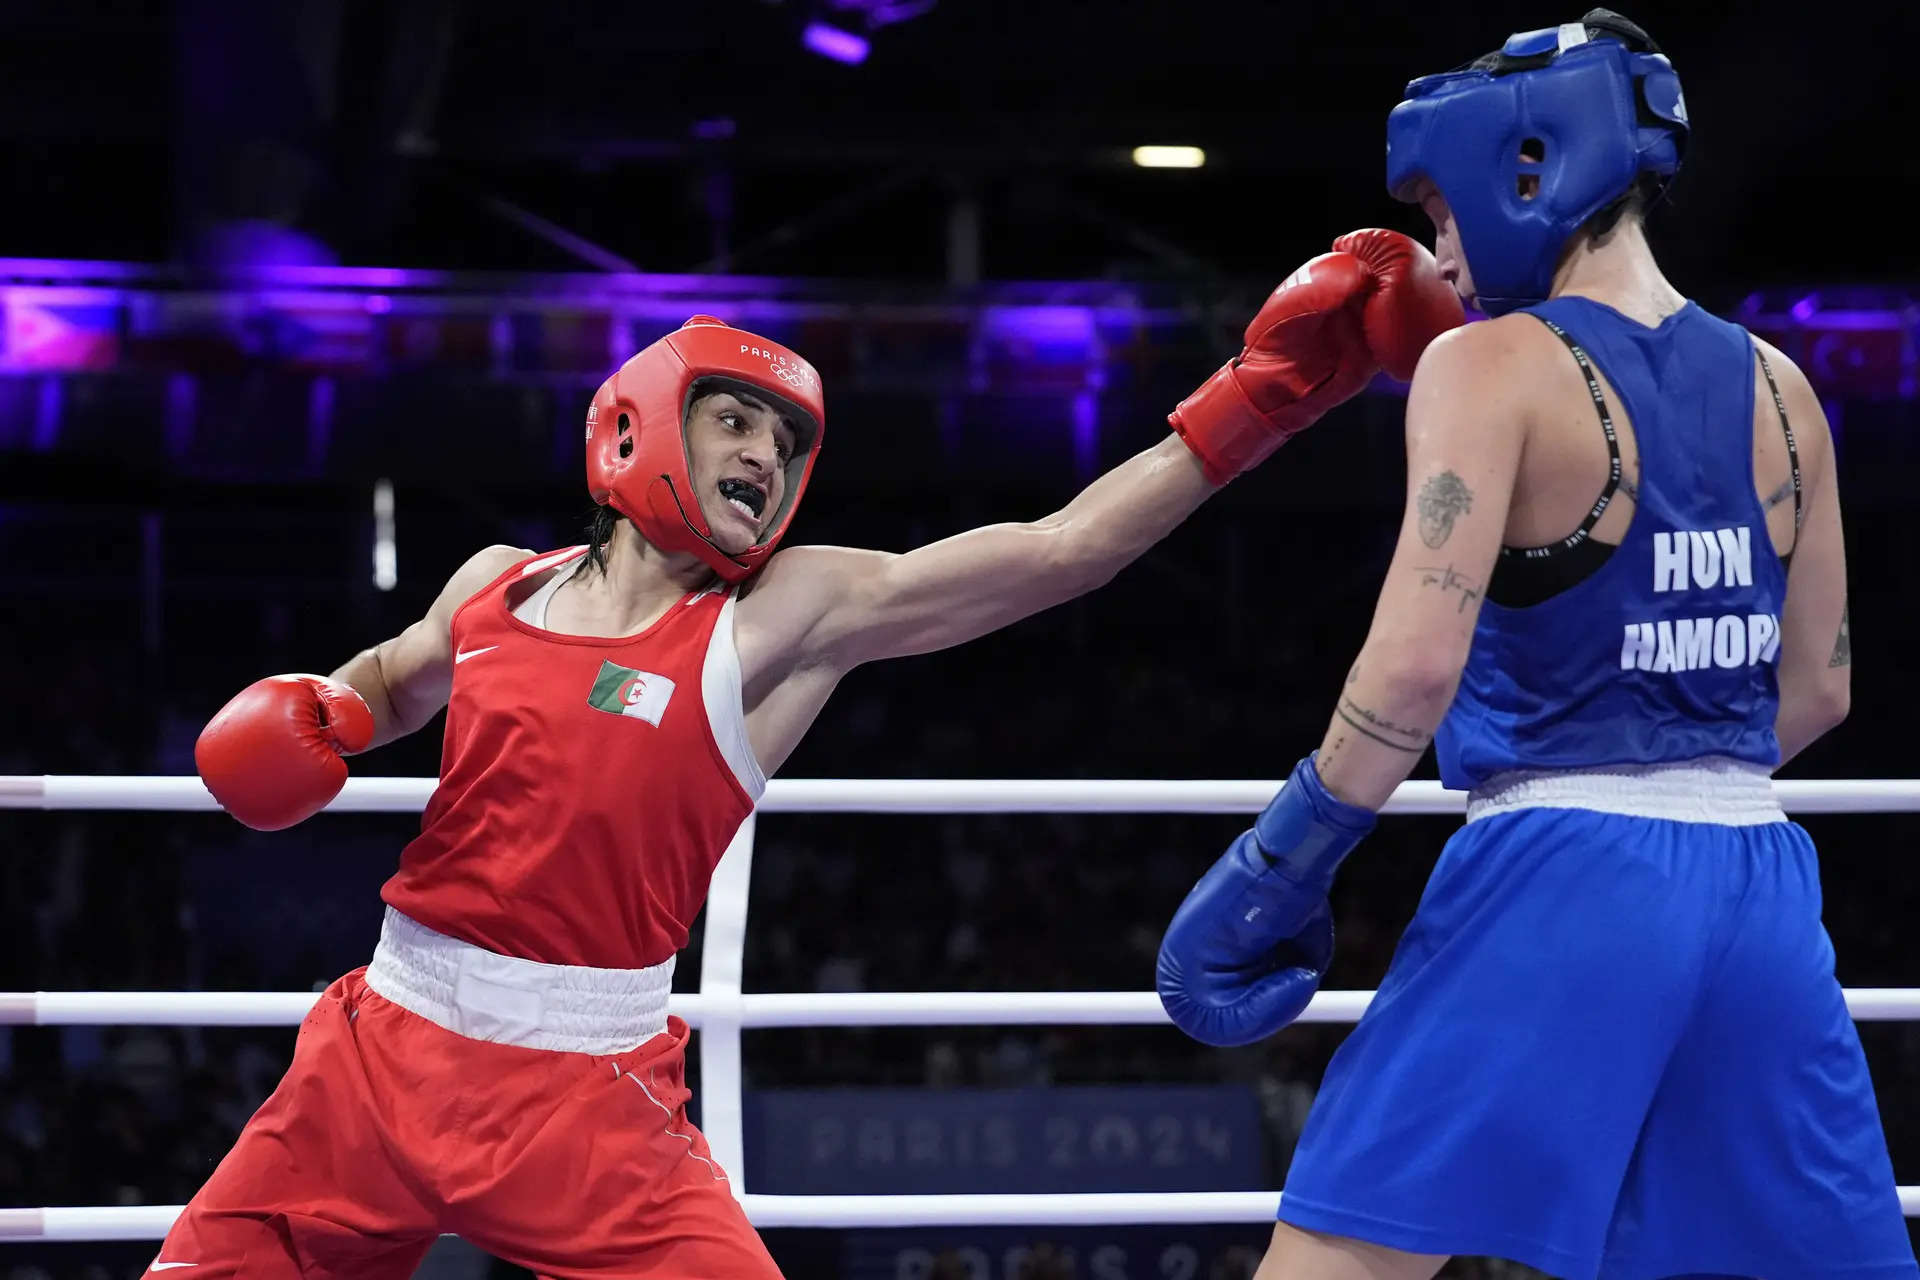 Sport of boxing must have new global body to get into LA Games - IOC 